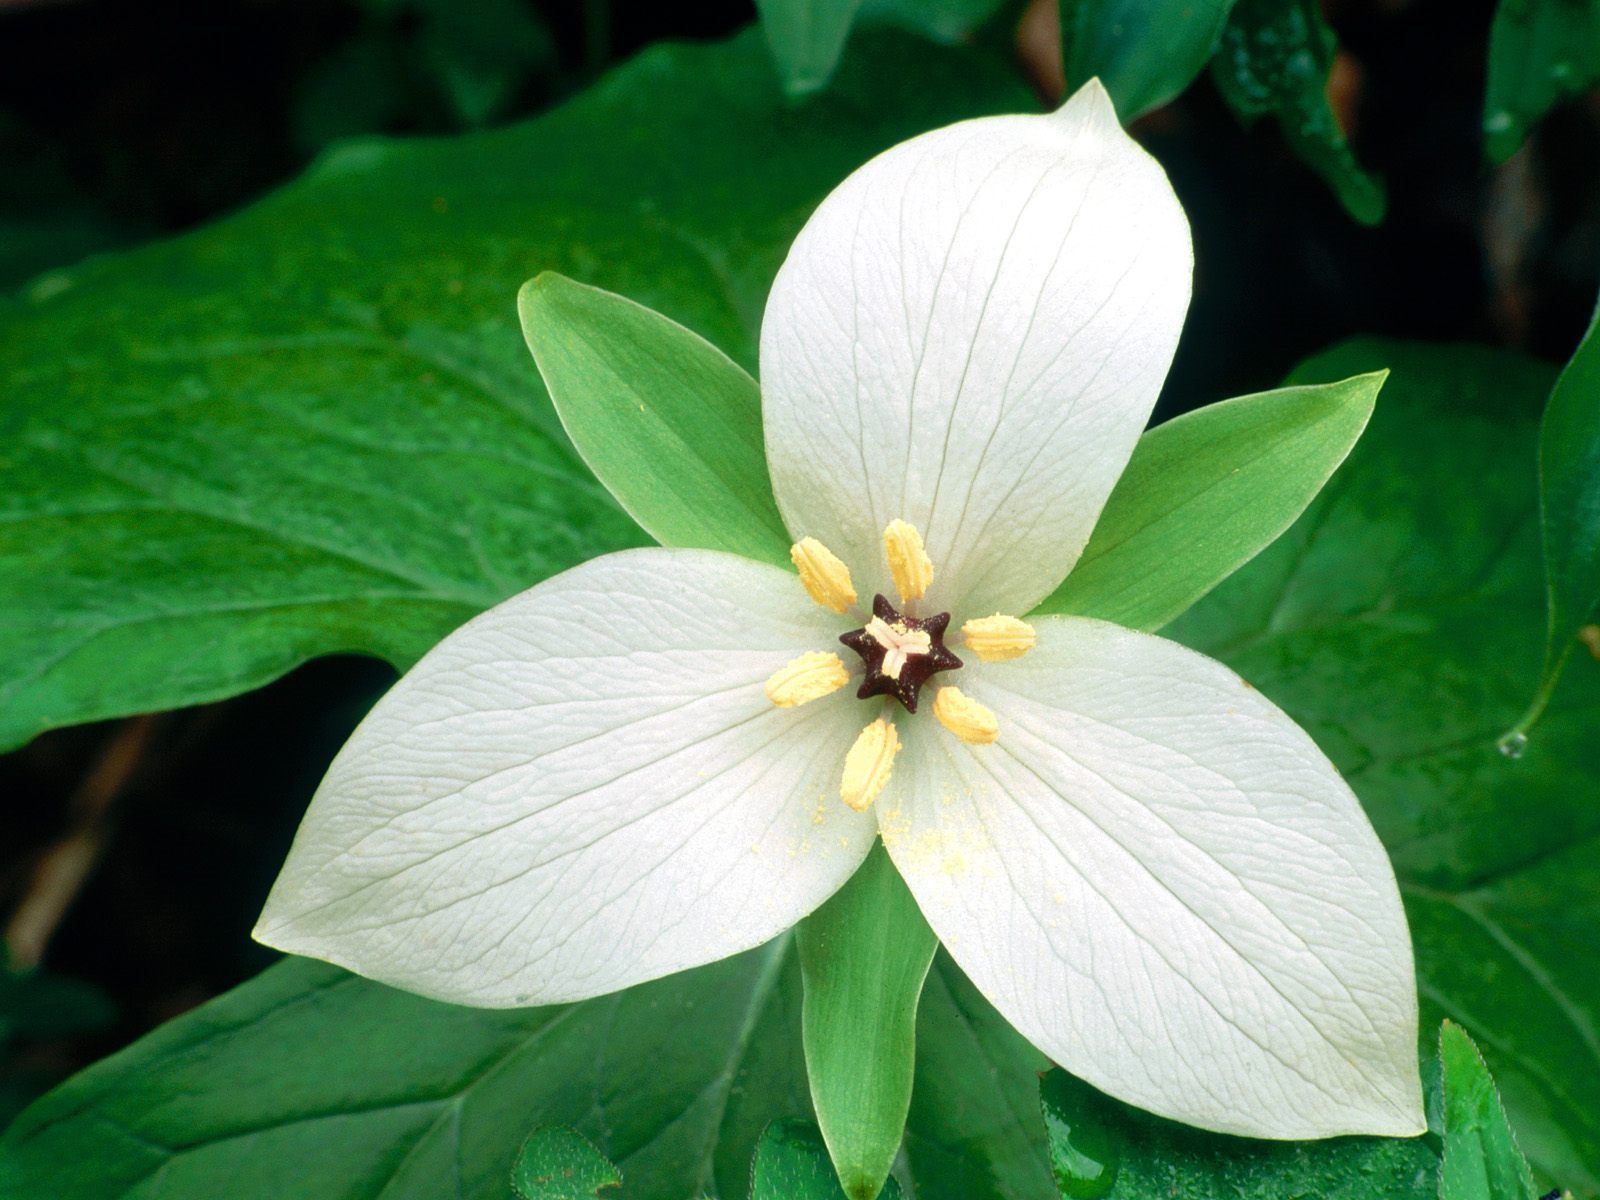 HD Wallpapers: 1600x1200 » Flowers » Amazing white flower with three ...